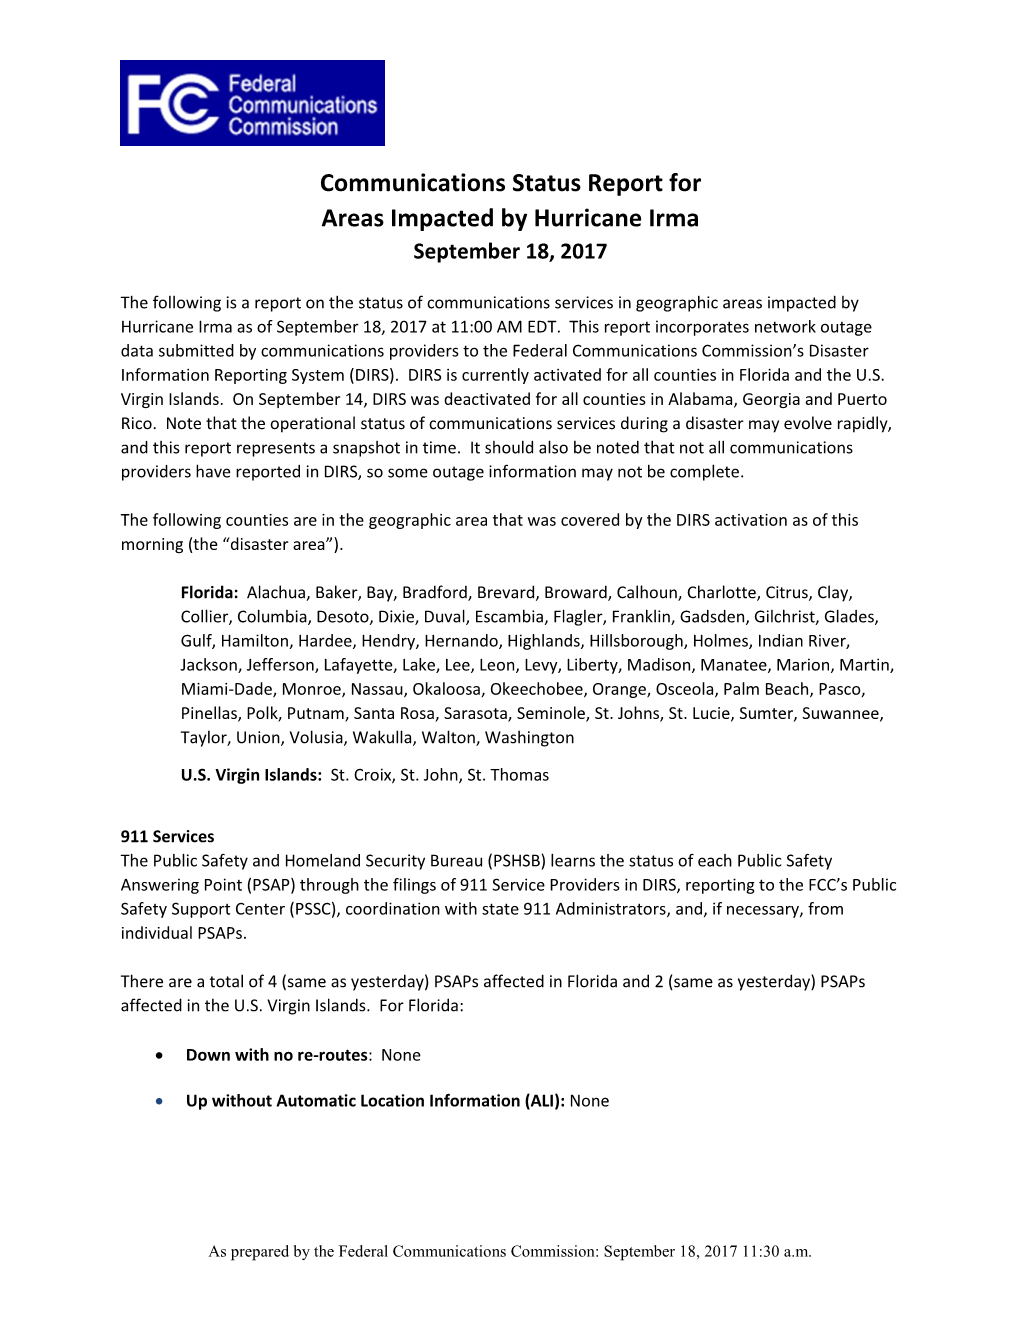 Communications Status Report for Areas Impacted by Hurricane Irma September 18, 2017